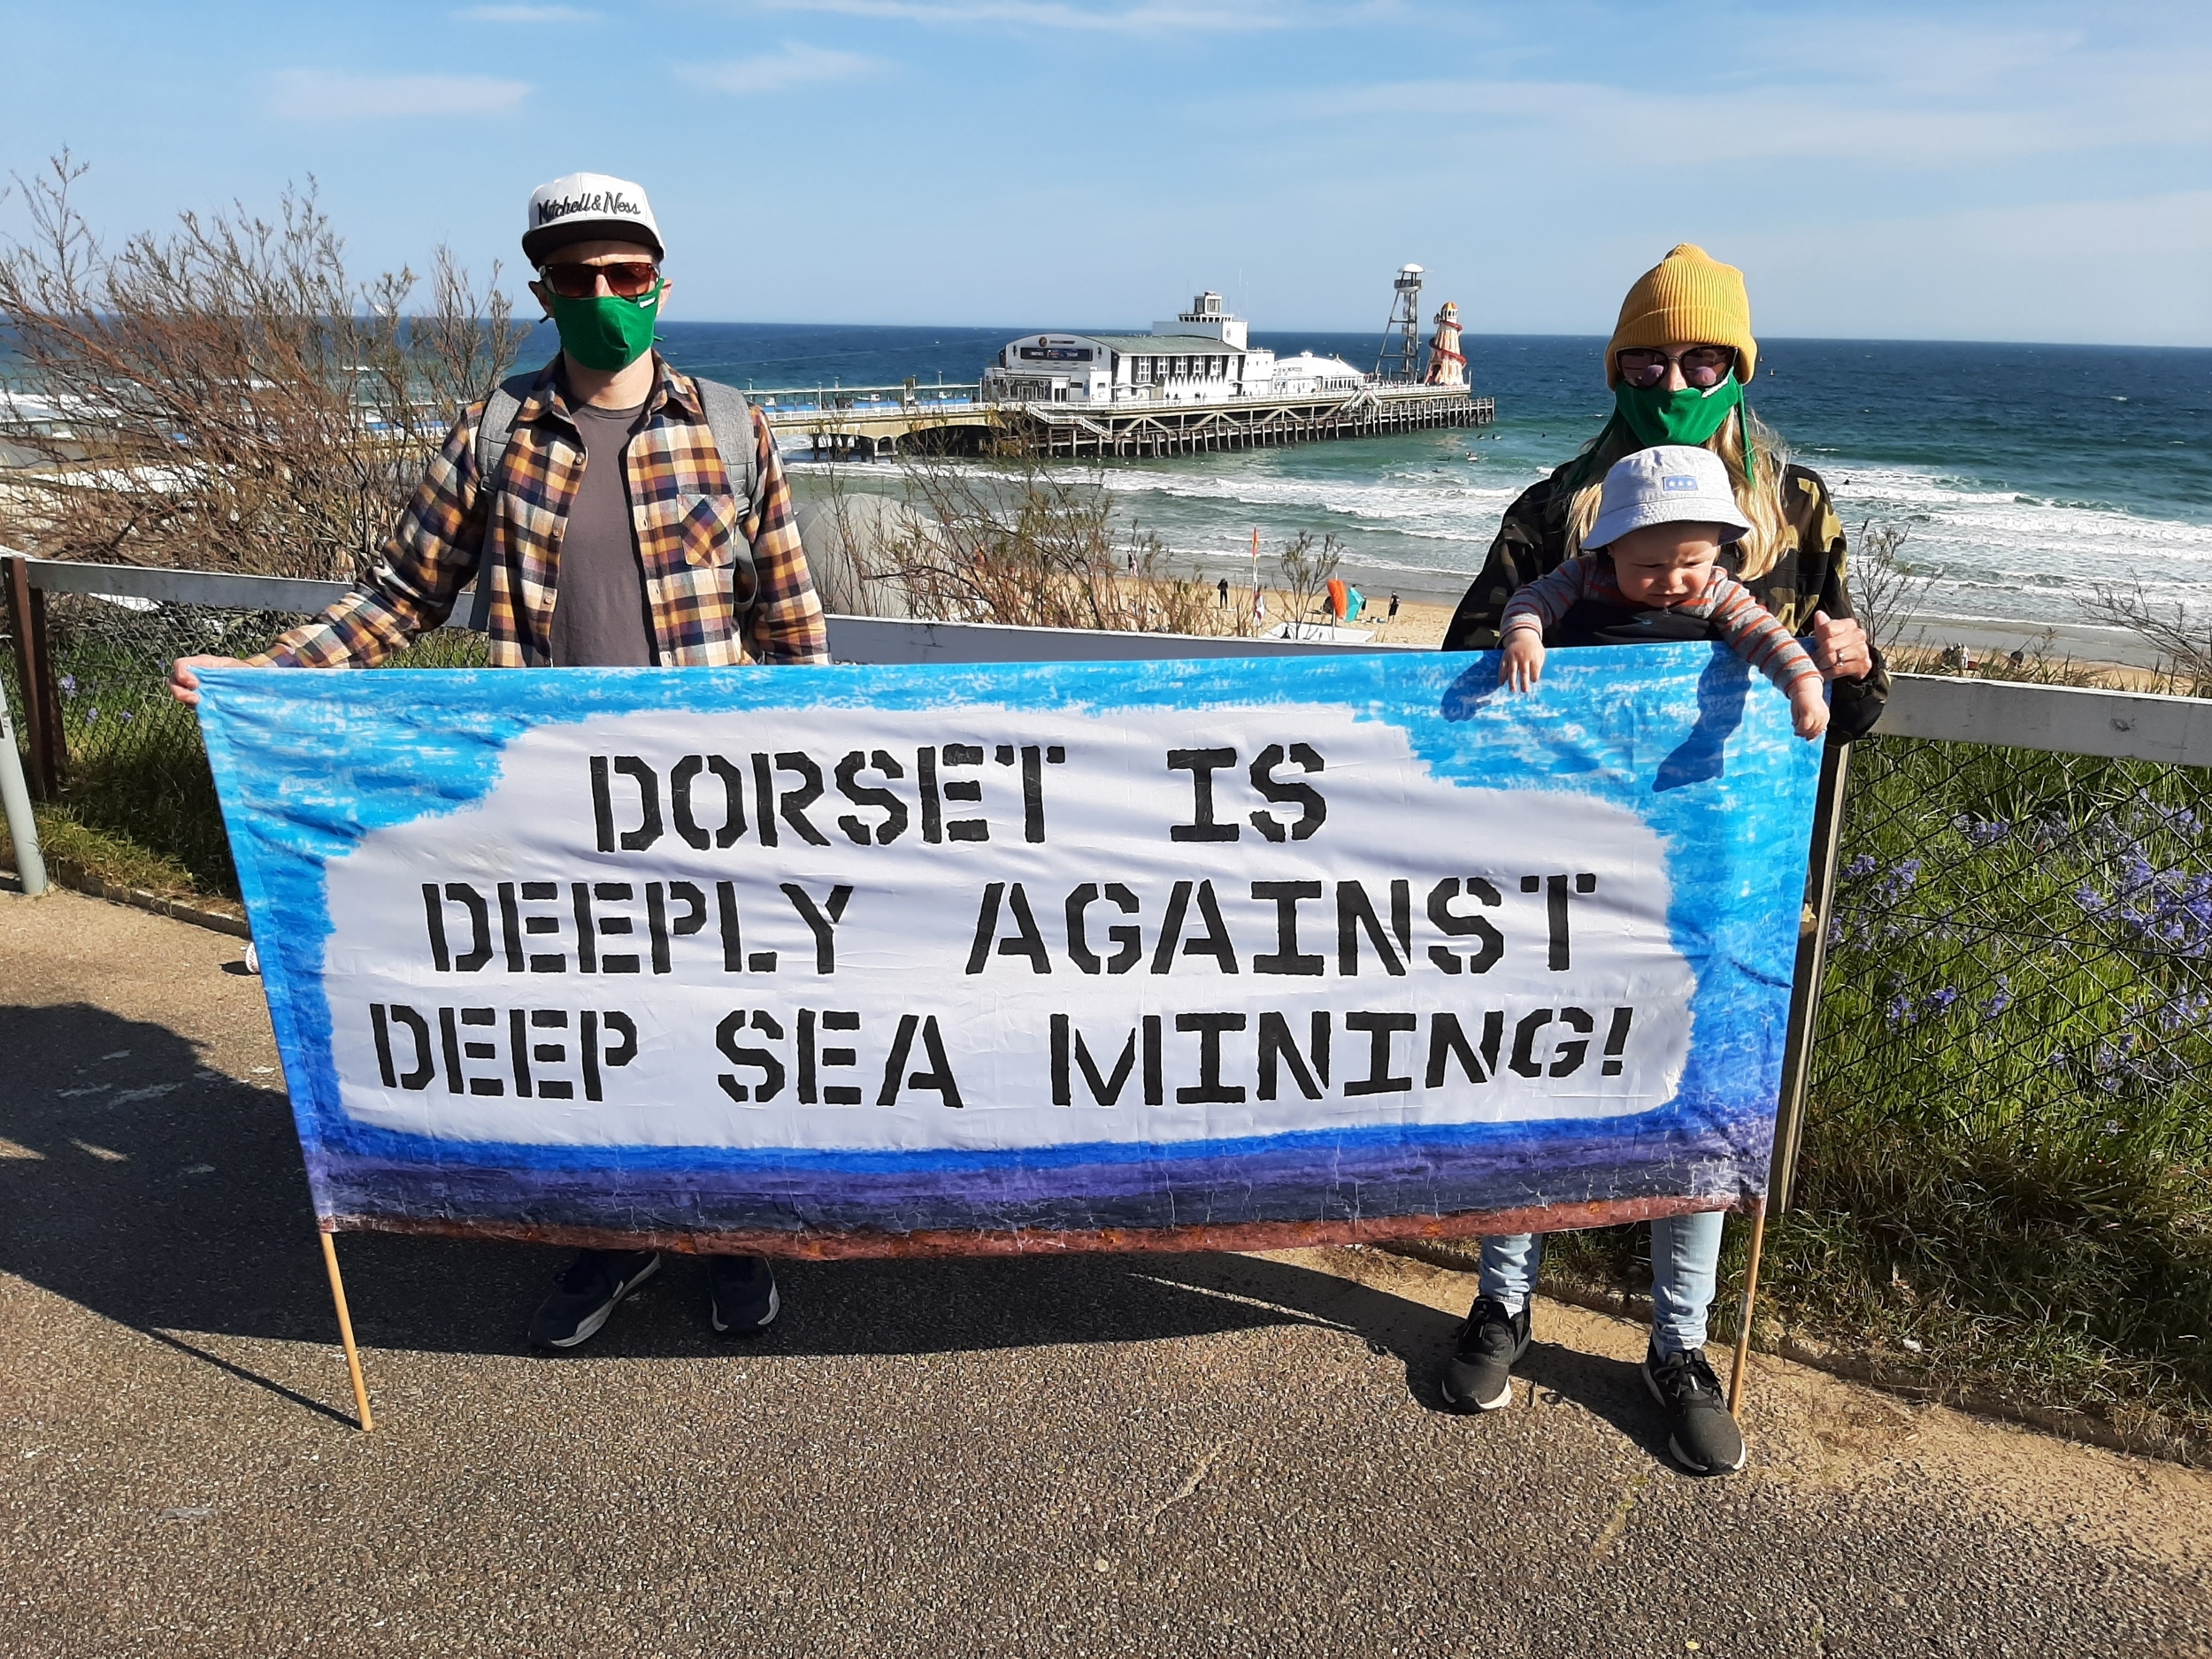 Two activists in green masks stand behind a large banner reading 'Dorset is deeply against deep sea mining'. The activist on the right carries a baby in a front-mounted carrier, and in the background a Victorian pier reaches into a calm blue sea.